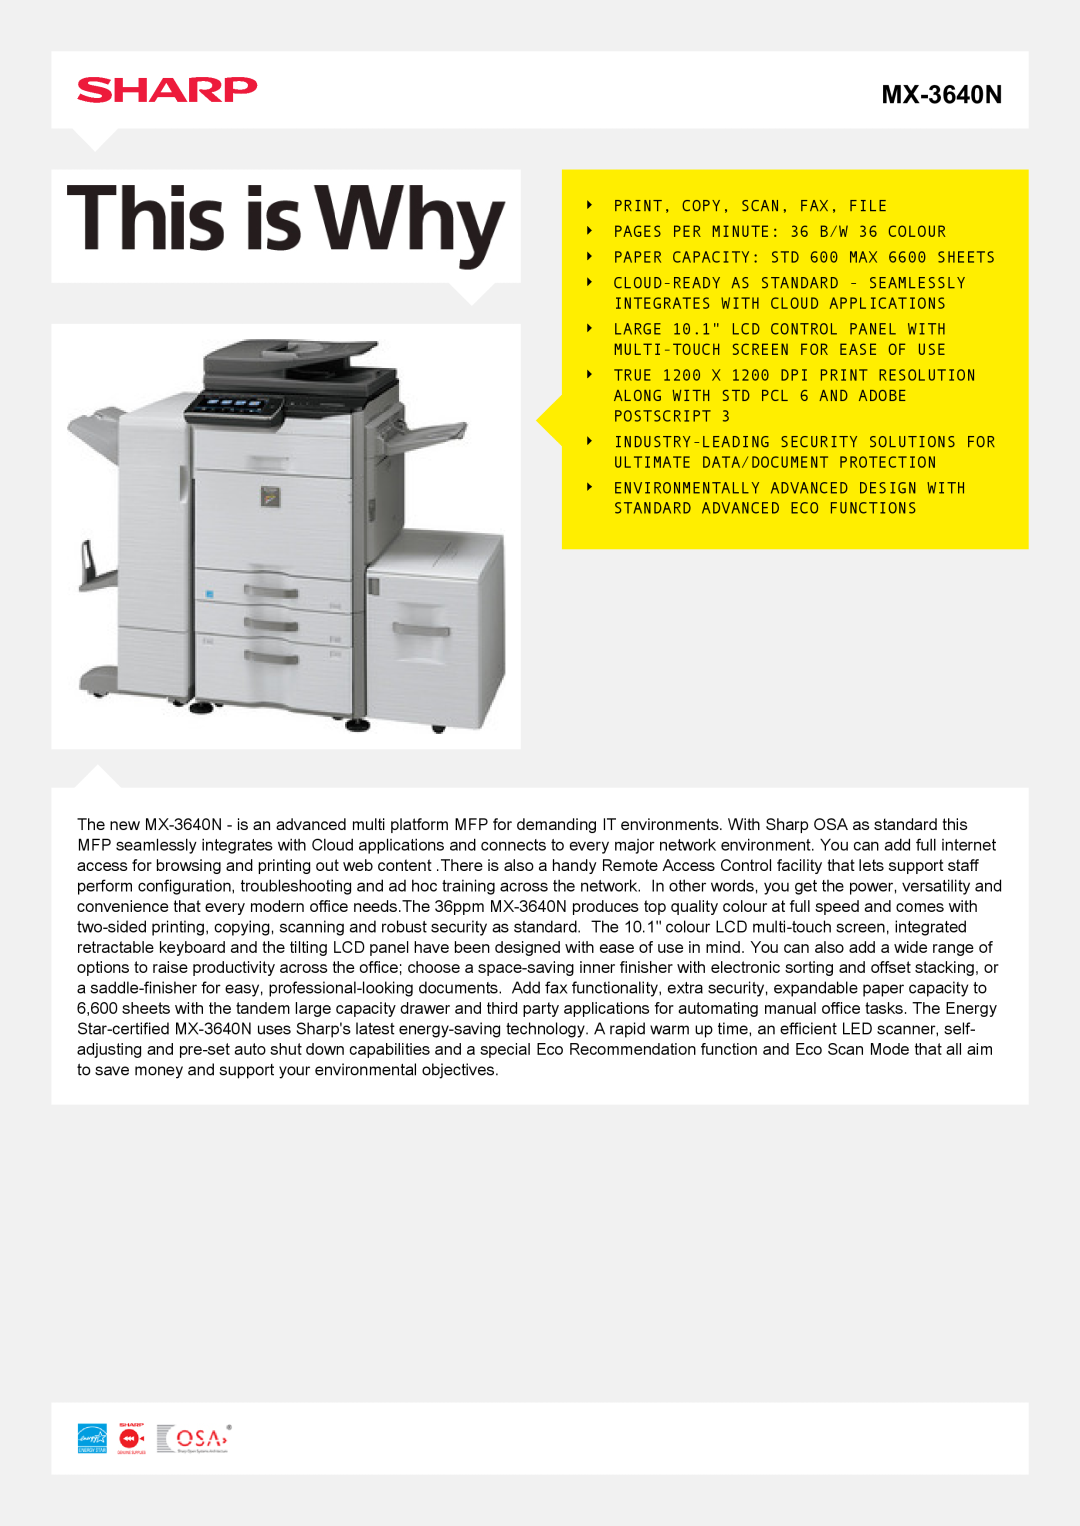 Sharp MX-3640N manual PRINT, COPY, SCAN, FAX, FILE PAGES PER MINUTE 36 B/W 36 COLOUR, Cloud-Ready As Standard - Seamlessly 